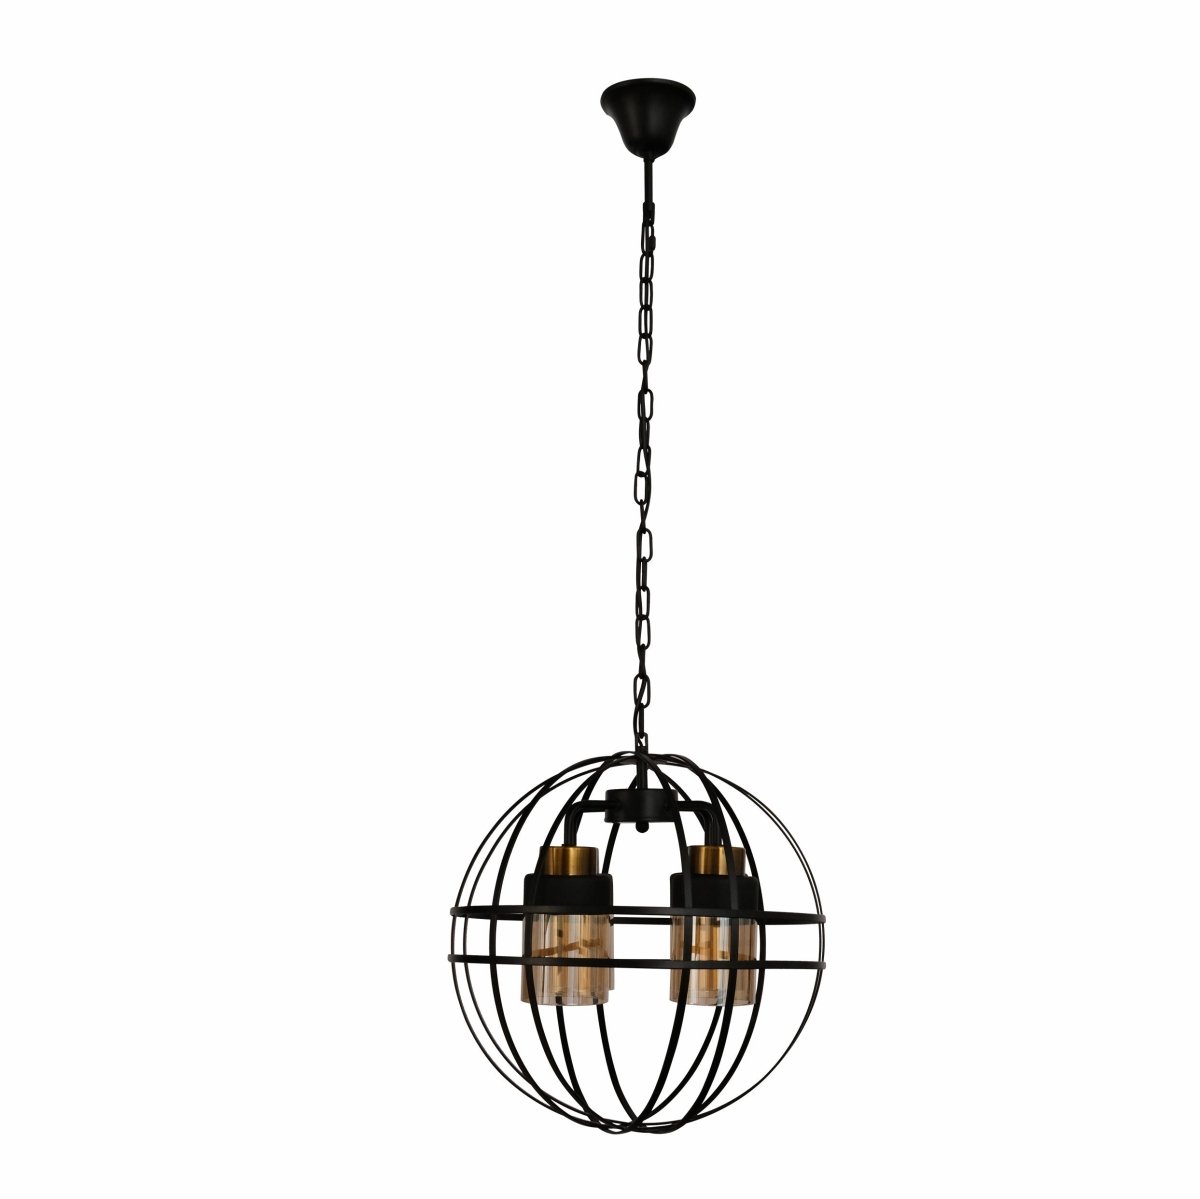 Main image of Amber Cylinder Glass Black Cage Metal Chandelier with 4xE27 Fitting | TEKLED 158-19572